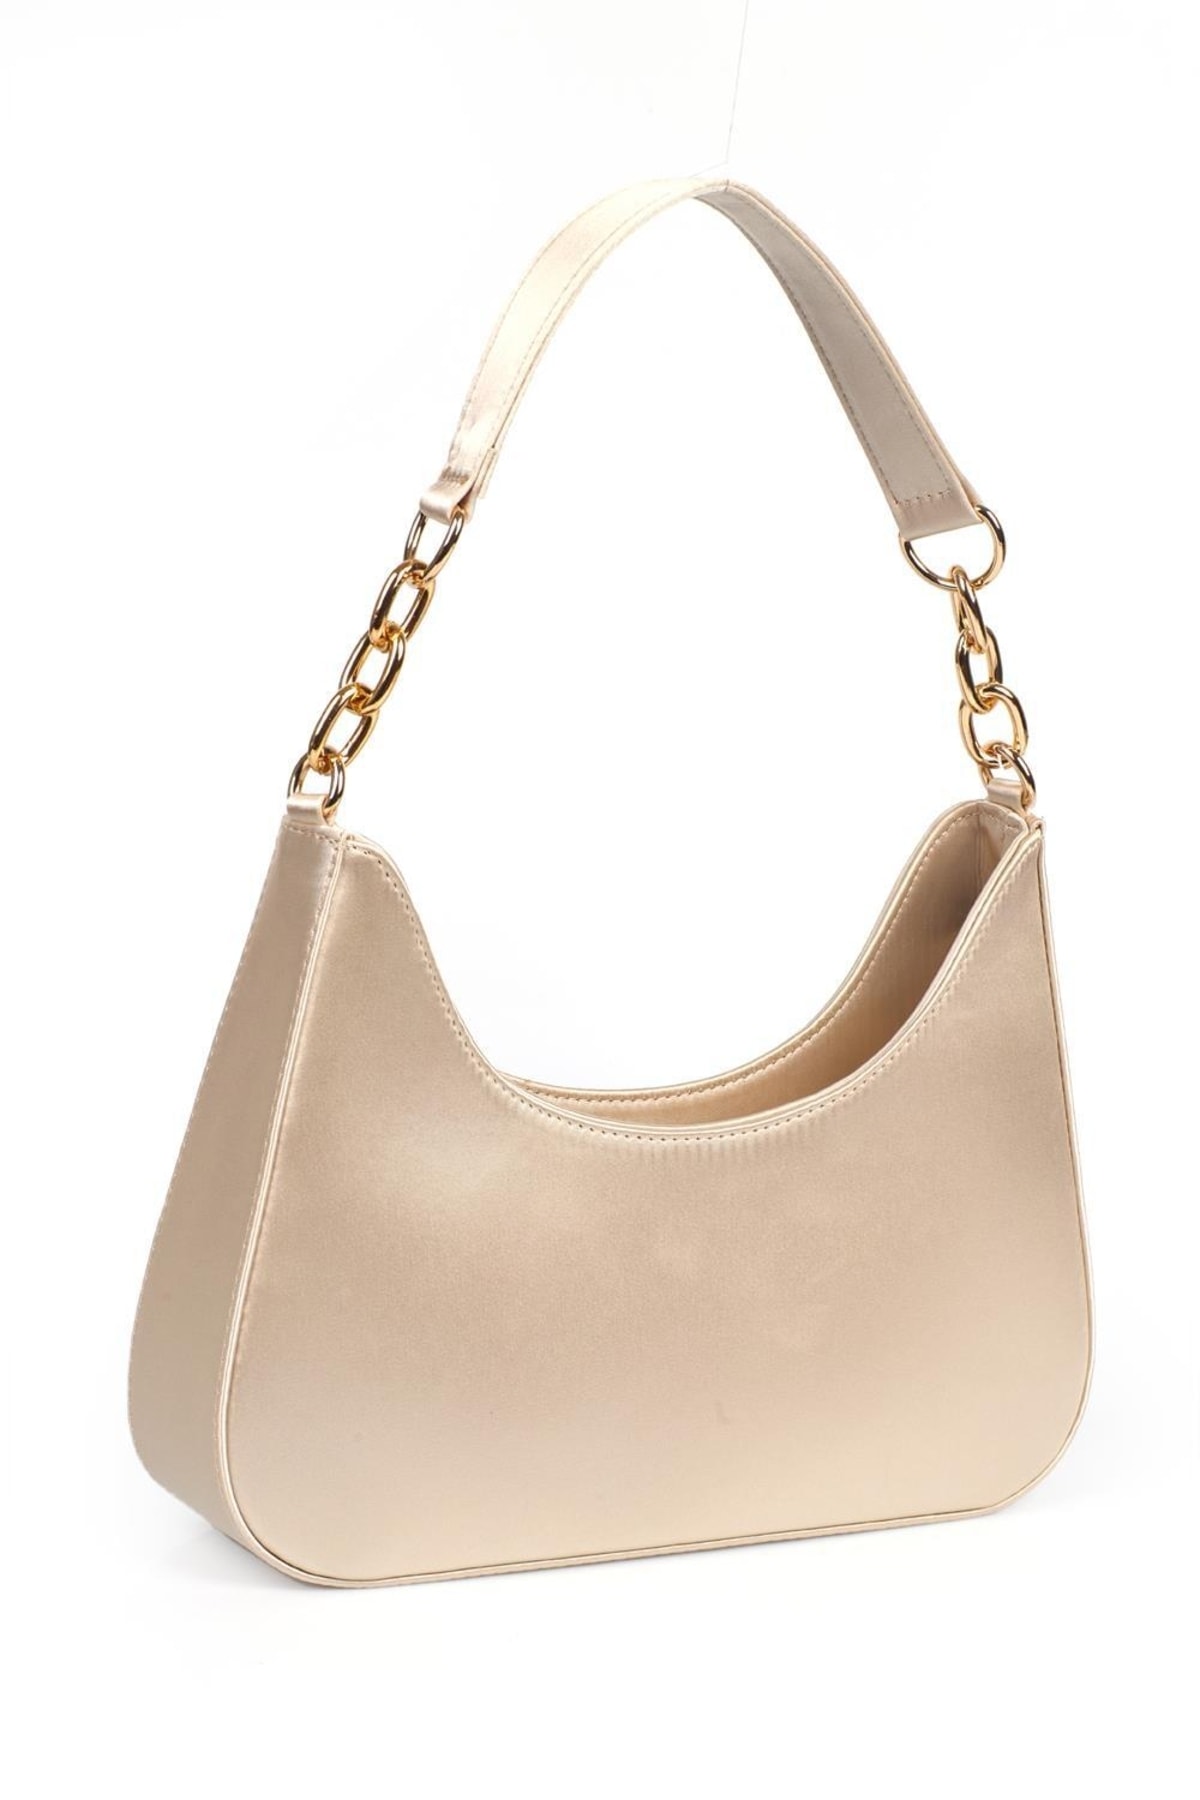 Capone Outfitters Capone Grado New Beige Women's Bag